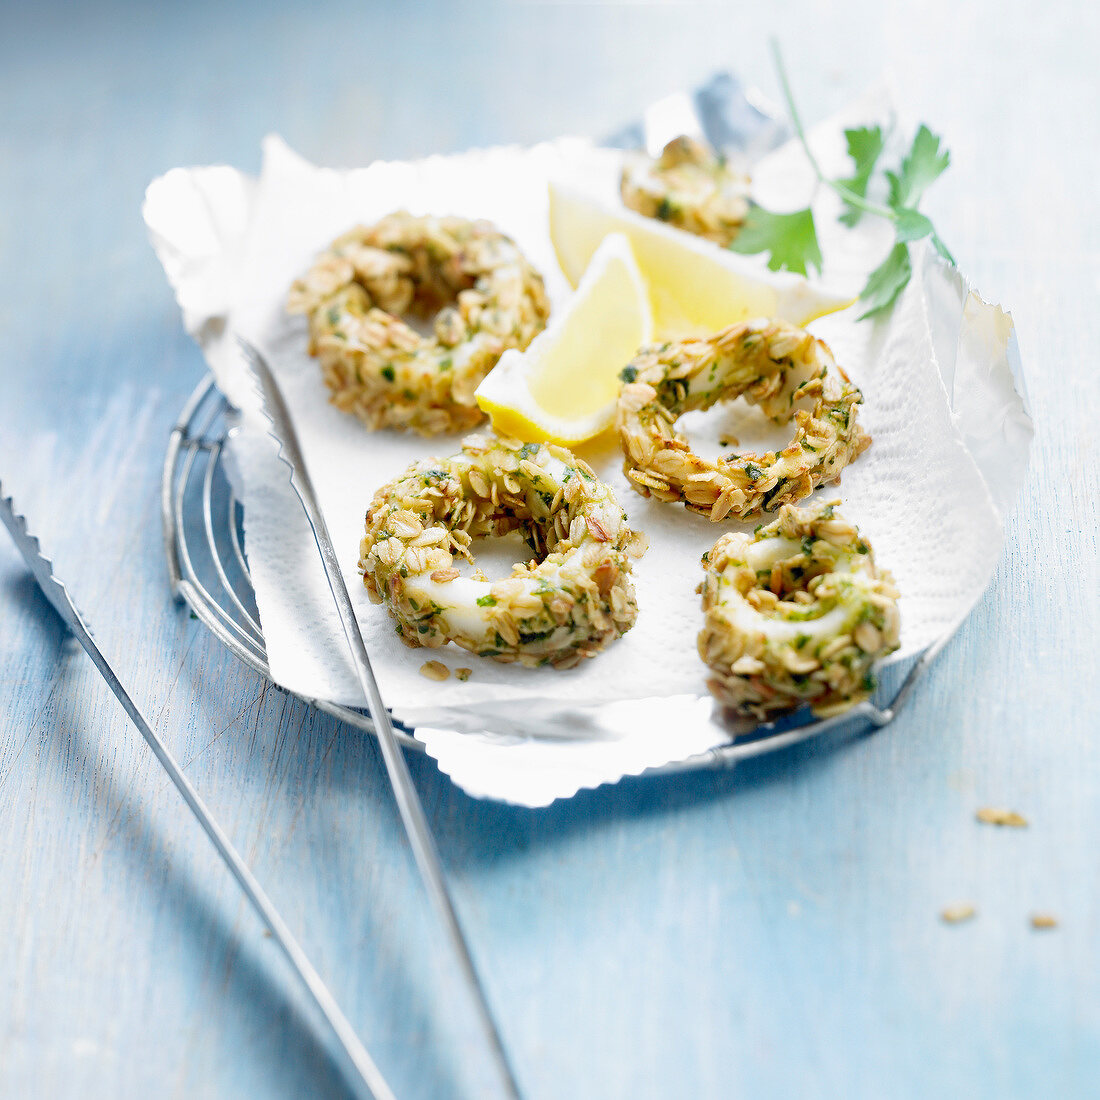 Fried squid rings coated with oatmeal and parsley